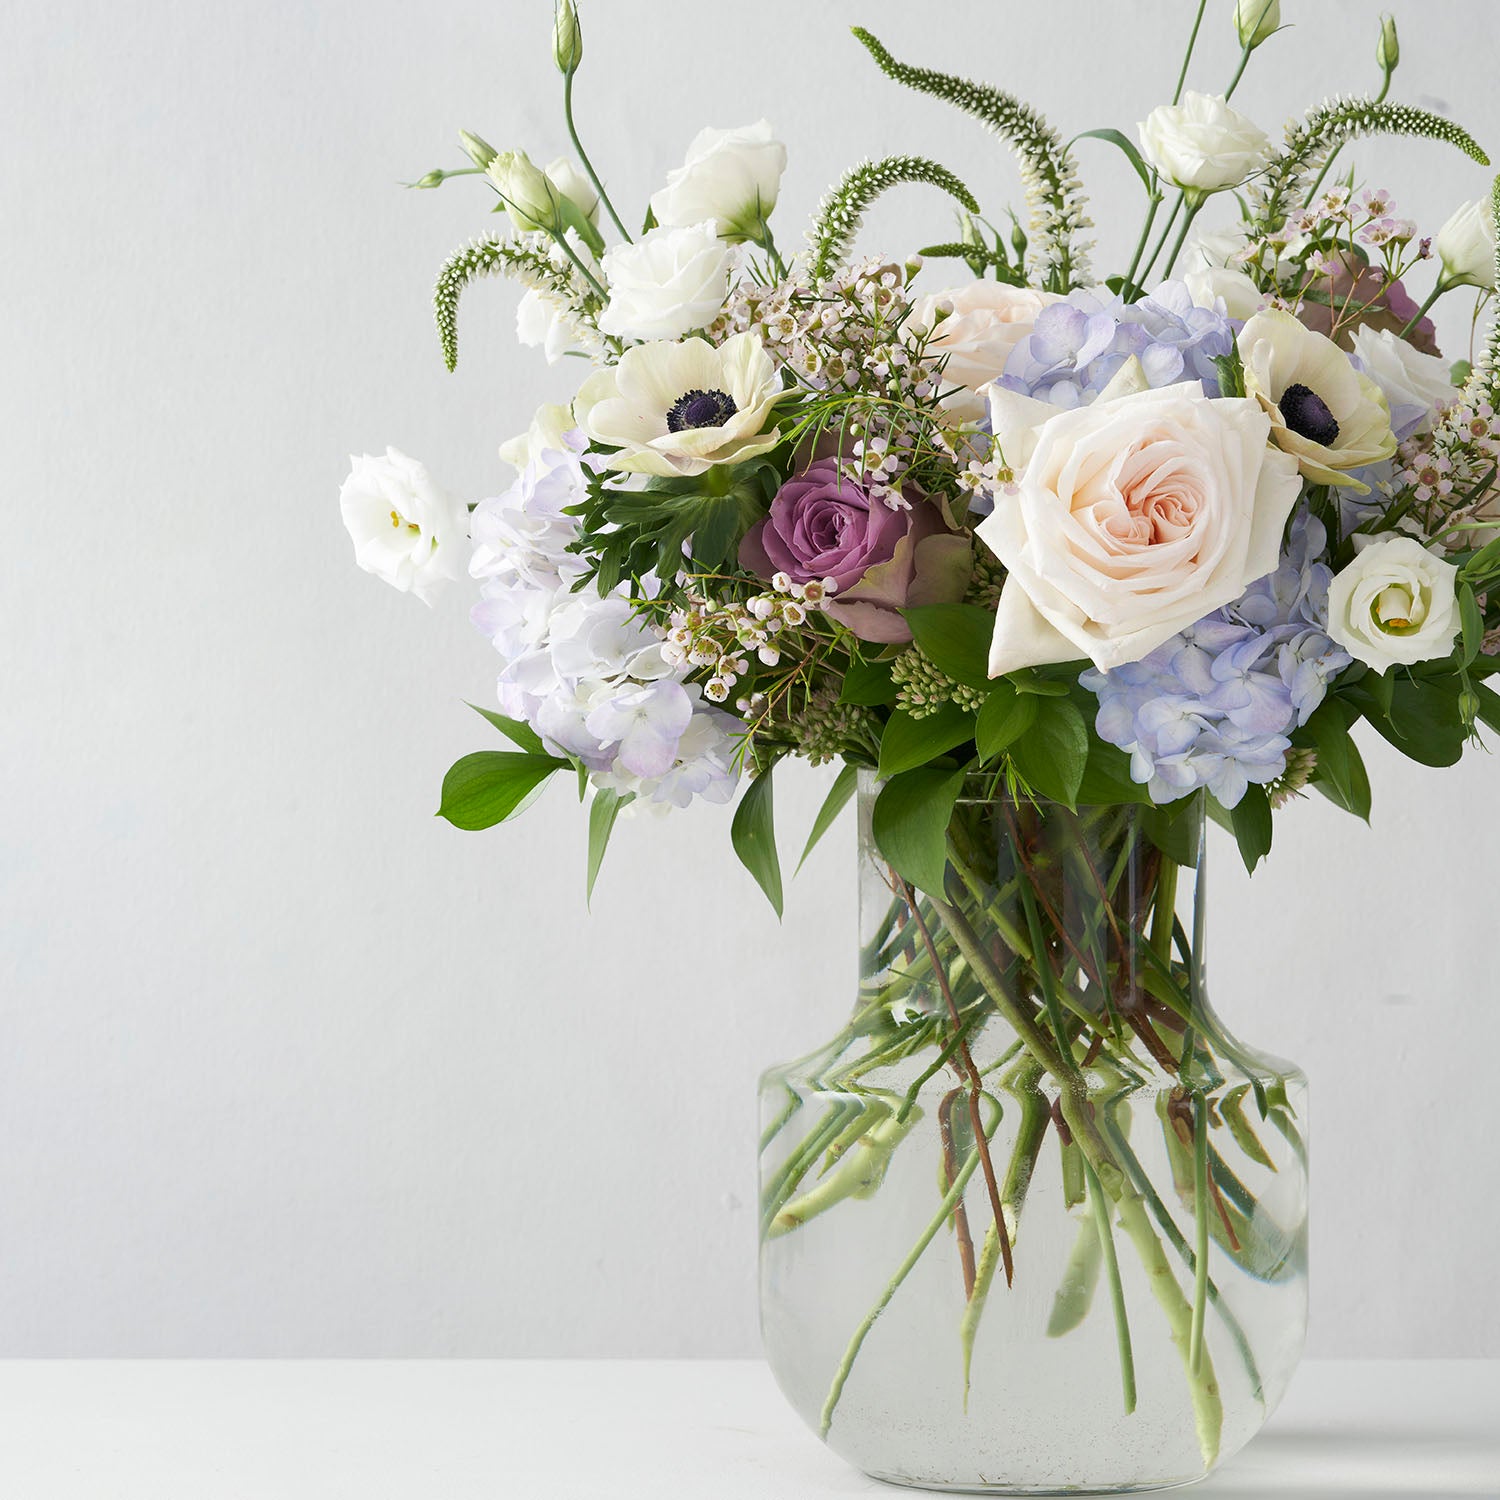 Lavender roses, blue hydrangea, white anemonies, white veronica, arranged in clear glass vase, on white background.